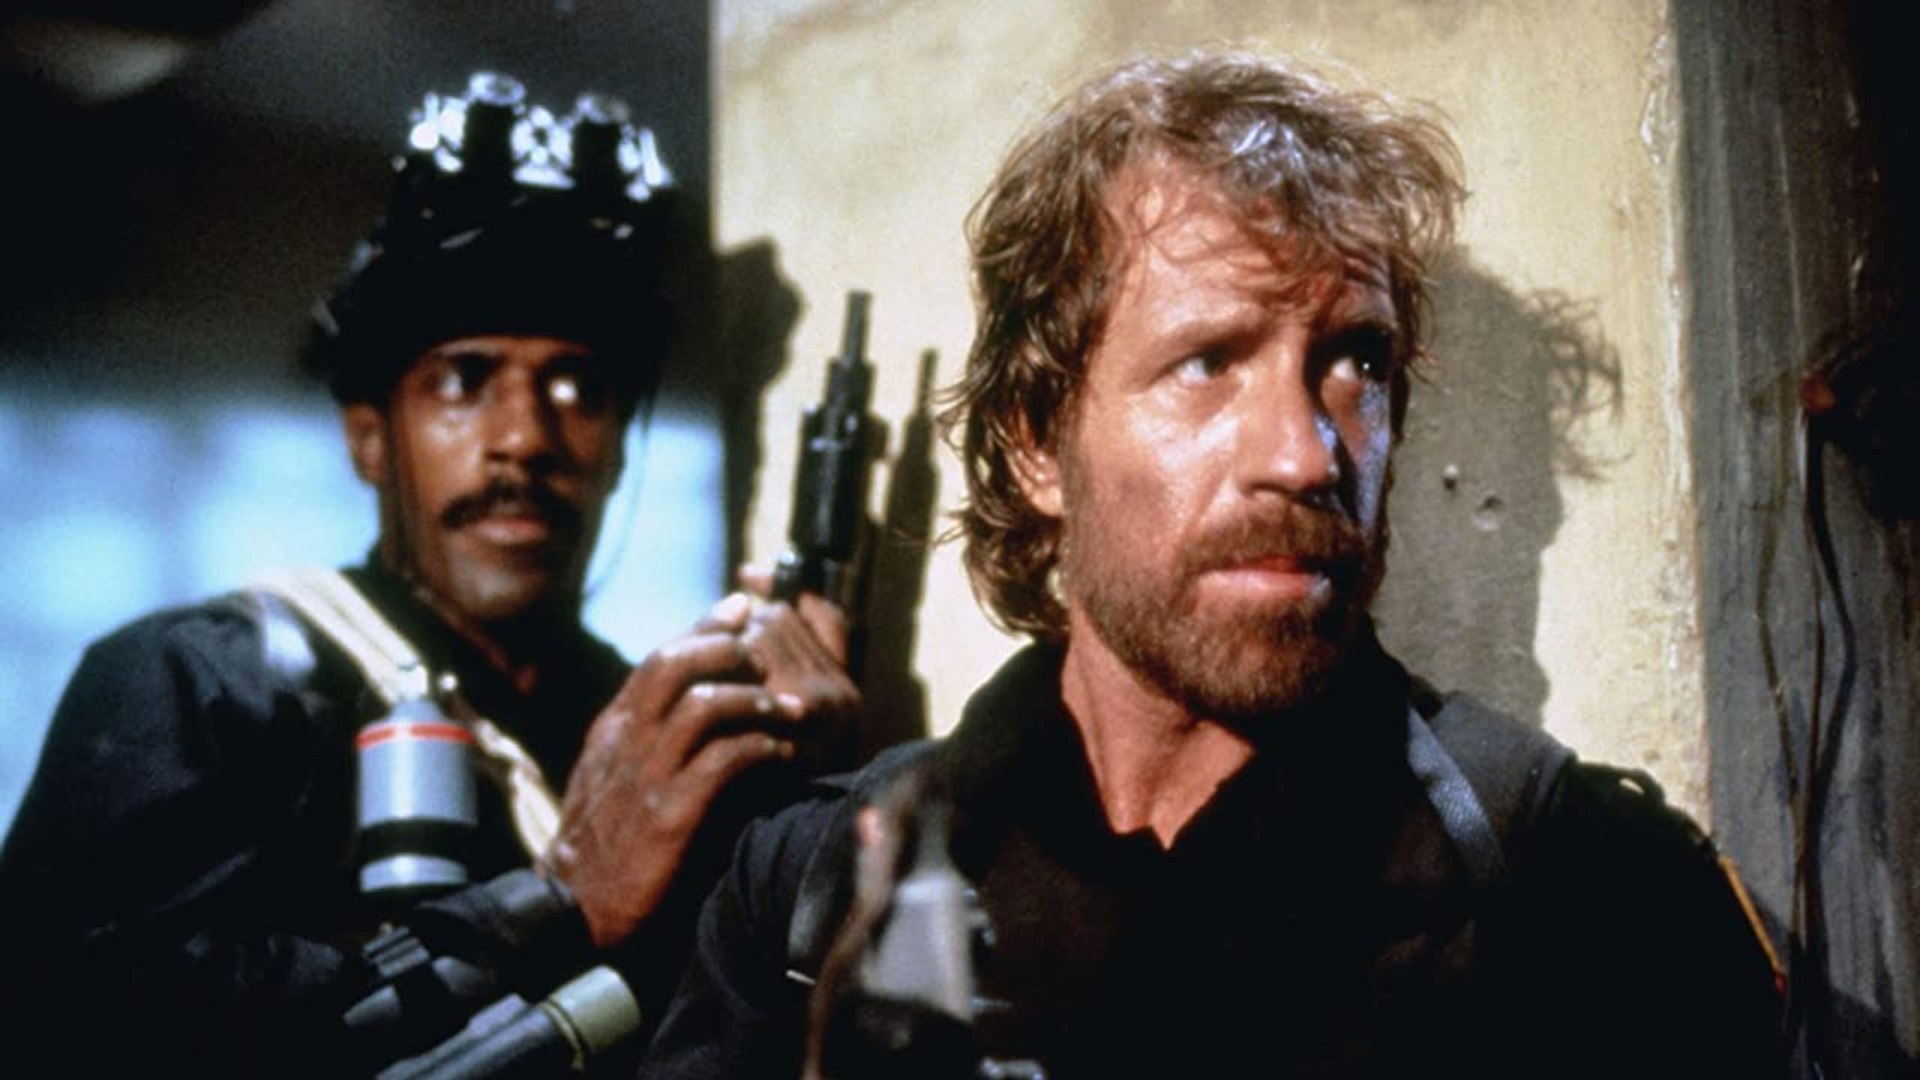 Chuck Norris takes on Palestinian fighters in Lebanon in Delta Force